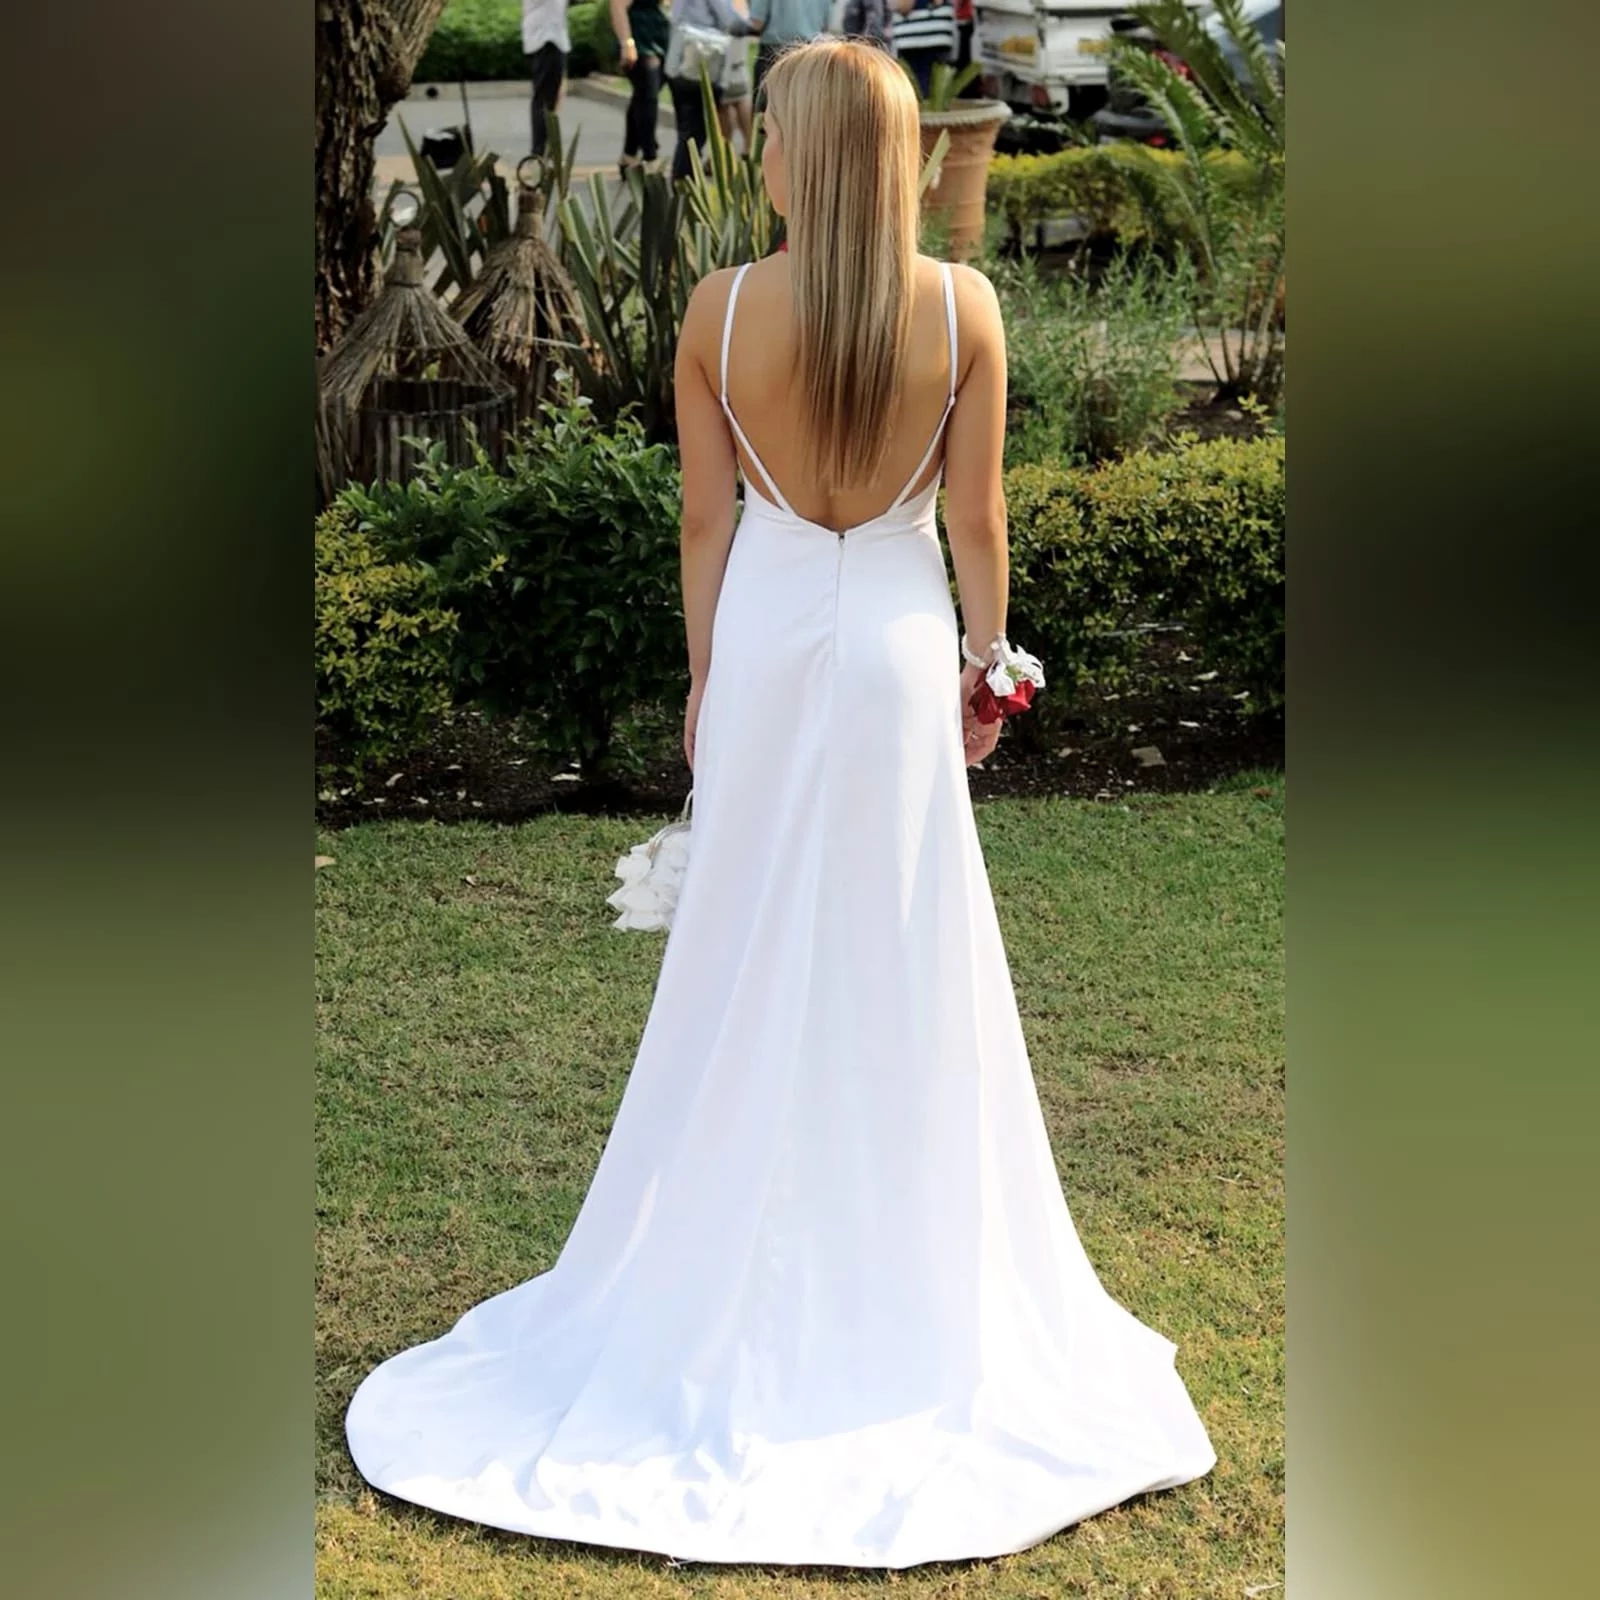 White satin long prom dress with a low open back 4 white satin long prom dress with a low open back, with strap detail. Straight neckline, 2 slits and a train.